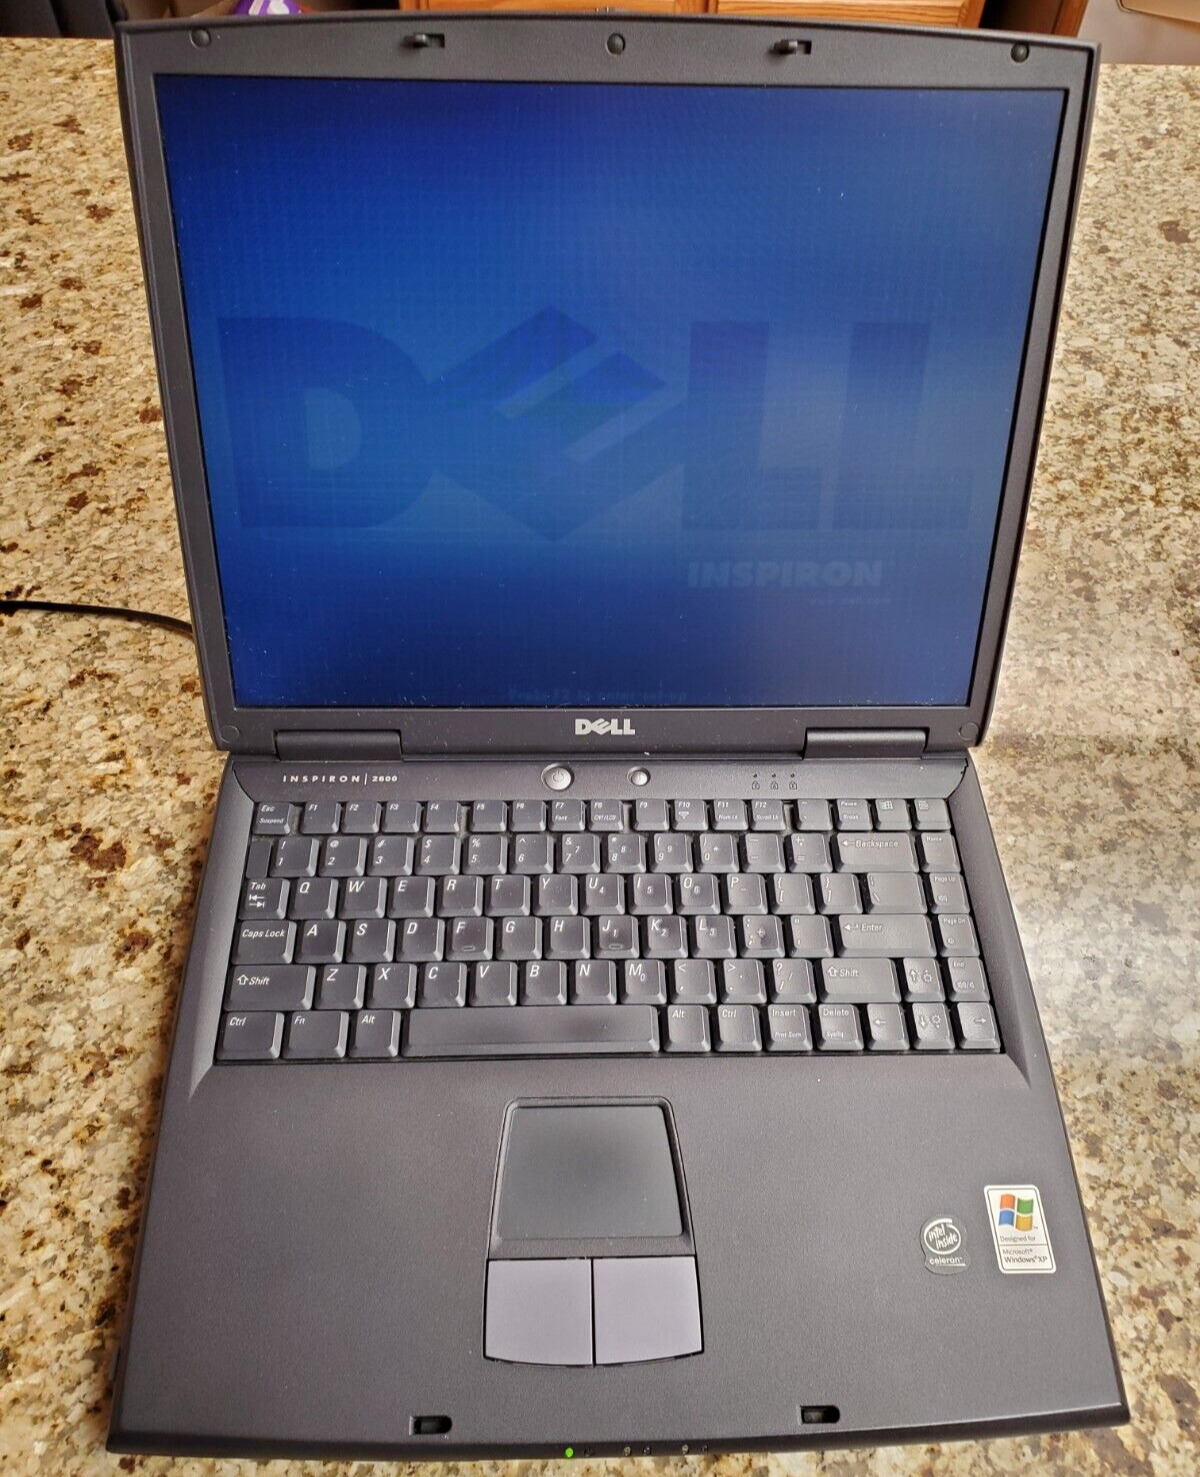 Retro Dell Inspiron 2600 PP04L Laptop | 128MB RAM | Boots to Bios